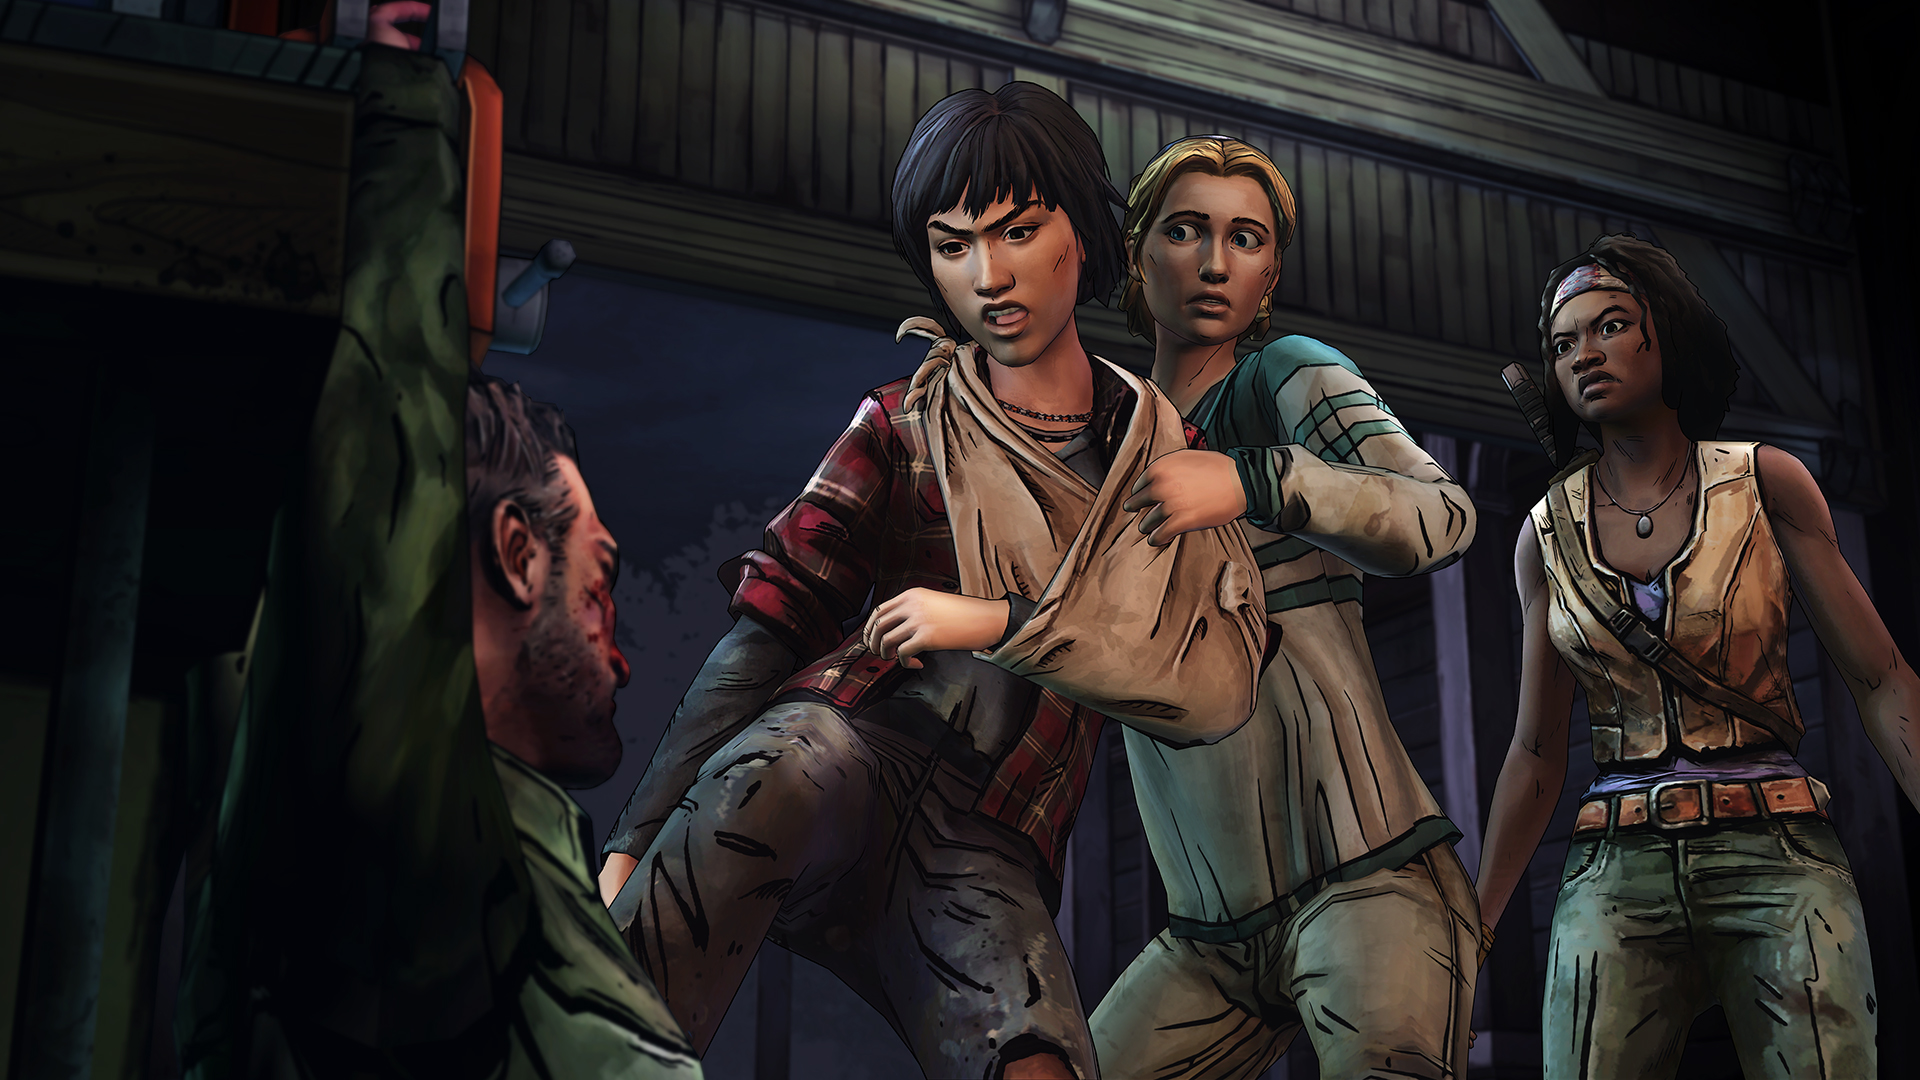 the walking dead a new frontier steam